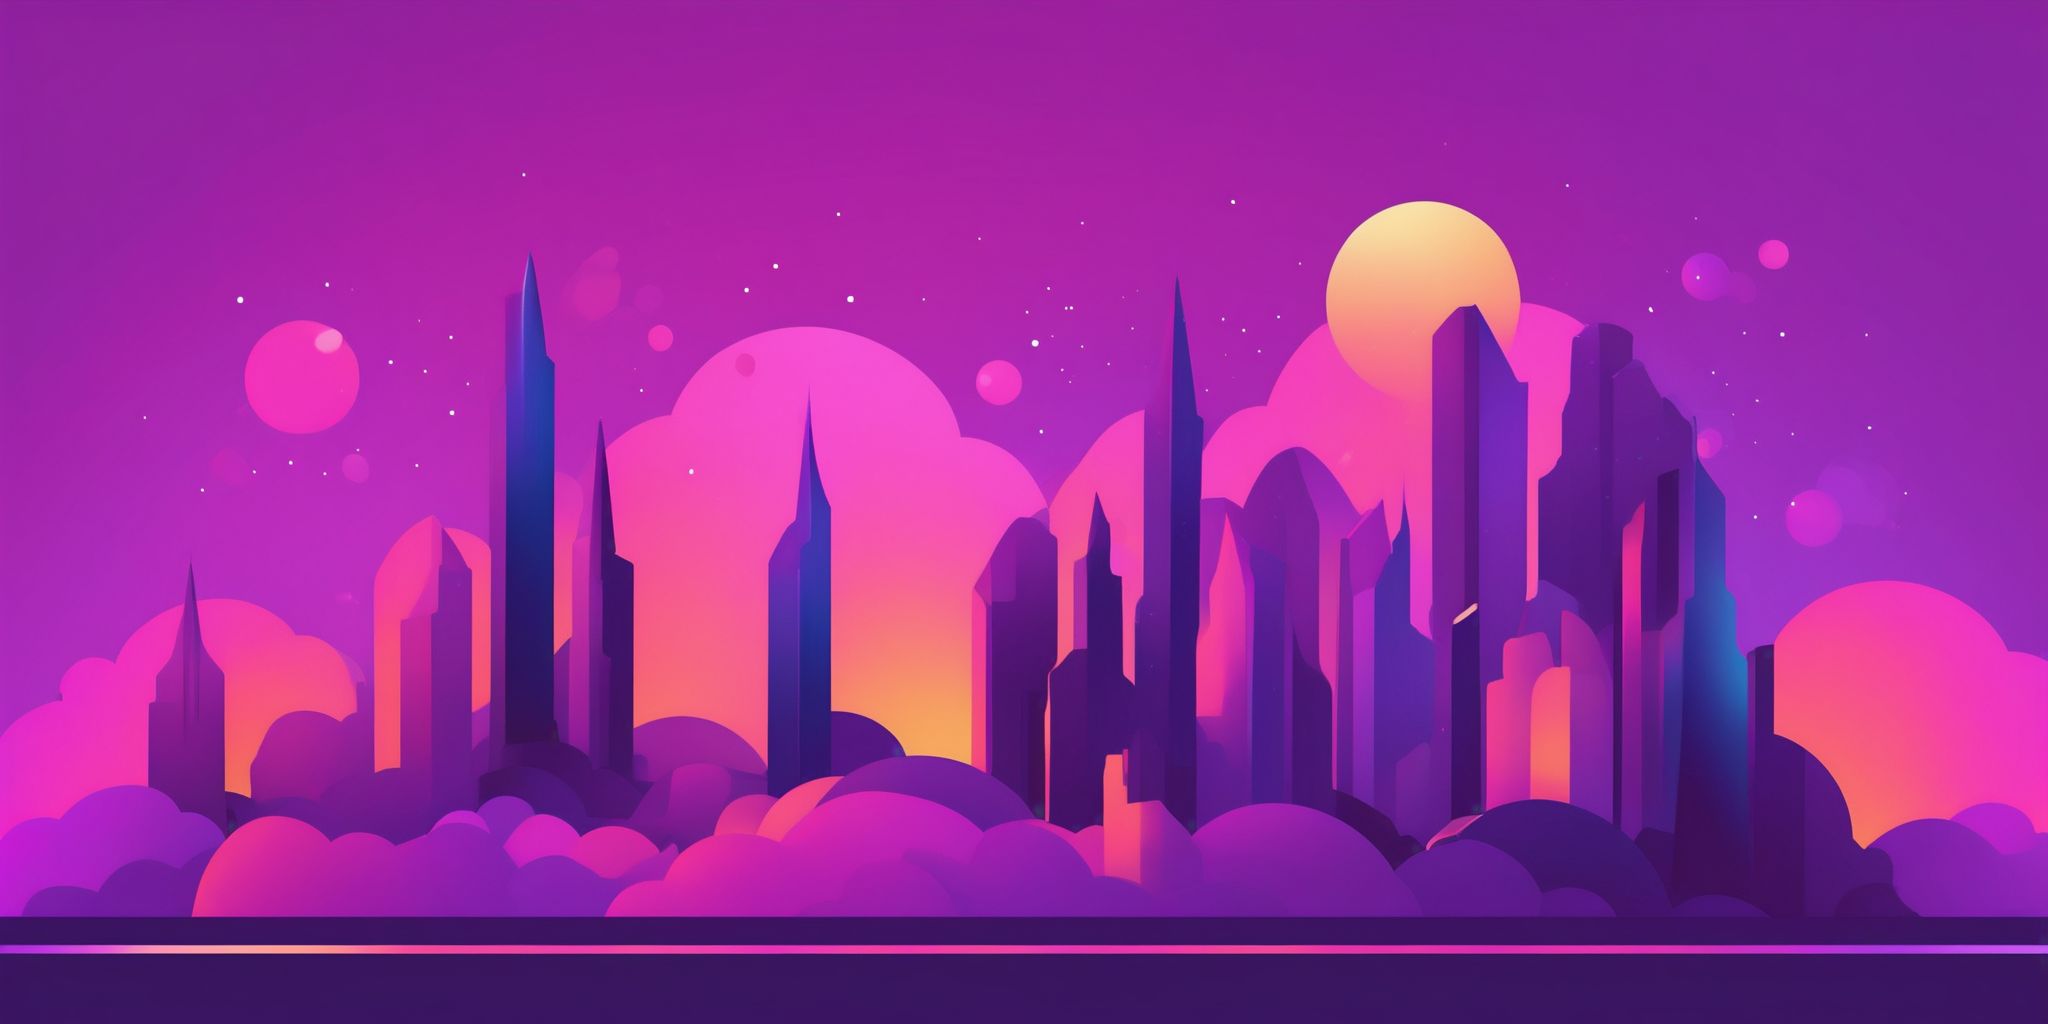 Icon in flat illustration style, colorful purple gradient colors